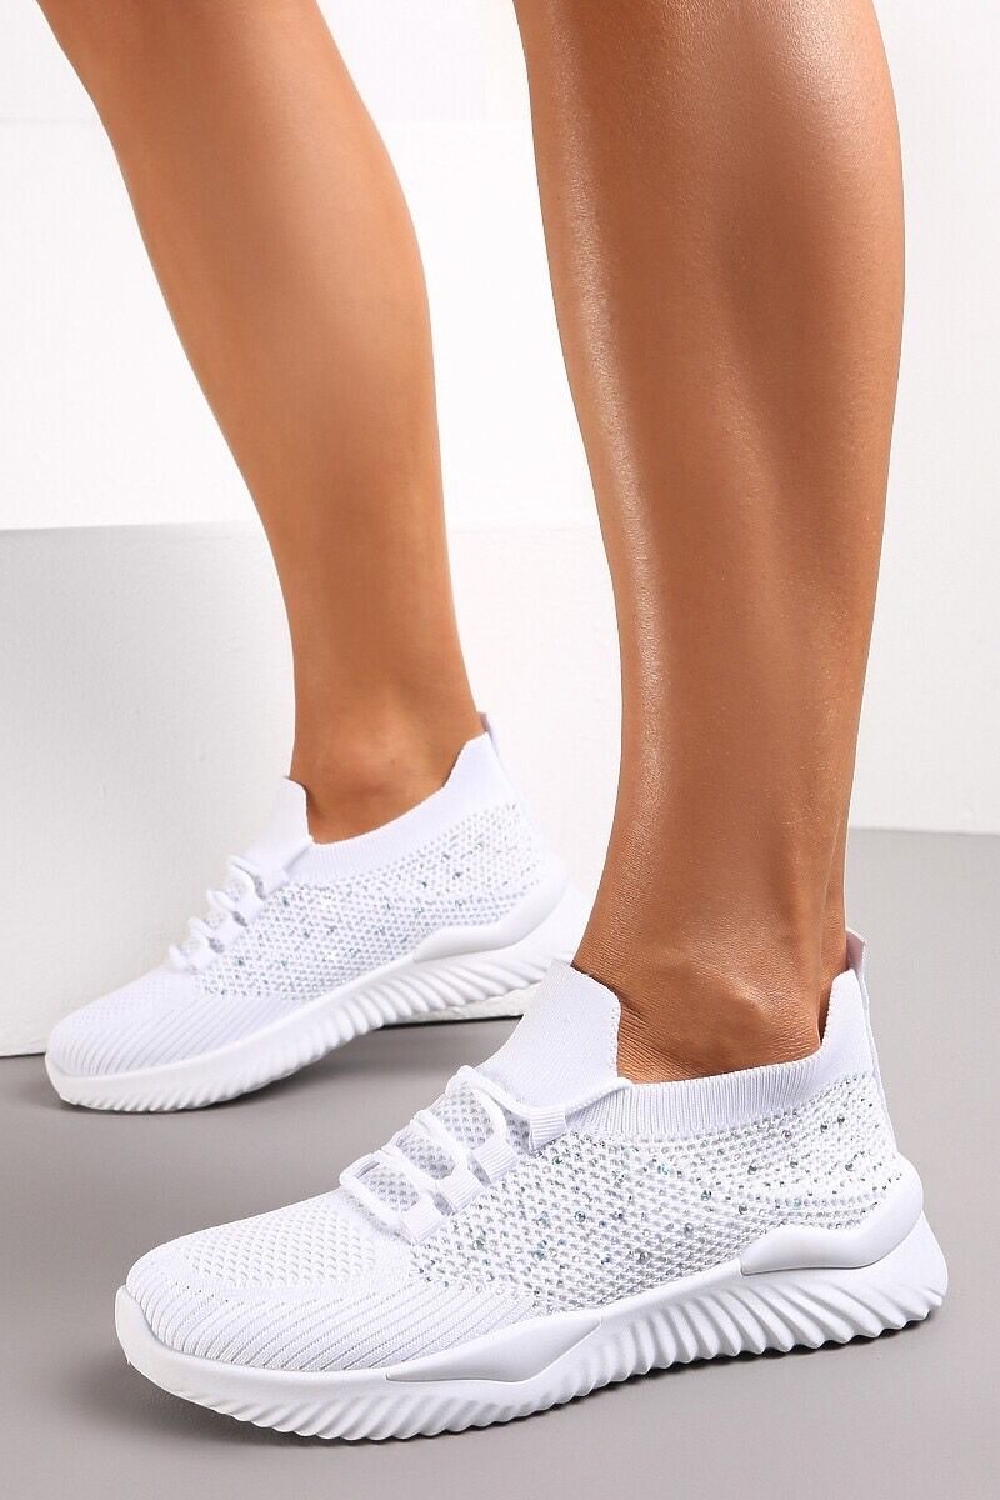 WHITE DIAMANTE DETAIL LACE UP TRAINERS SHOES